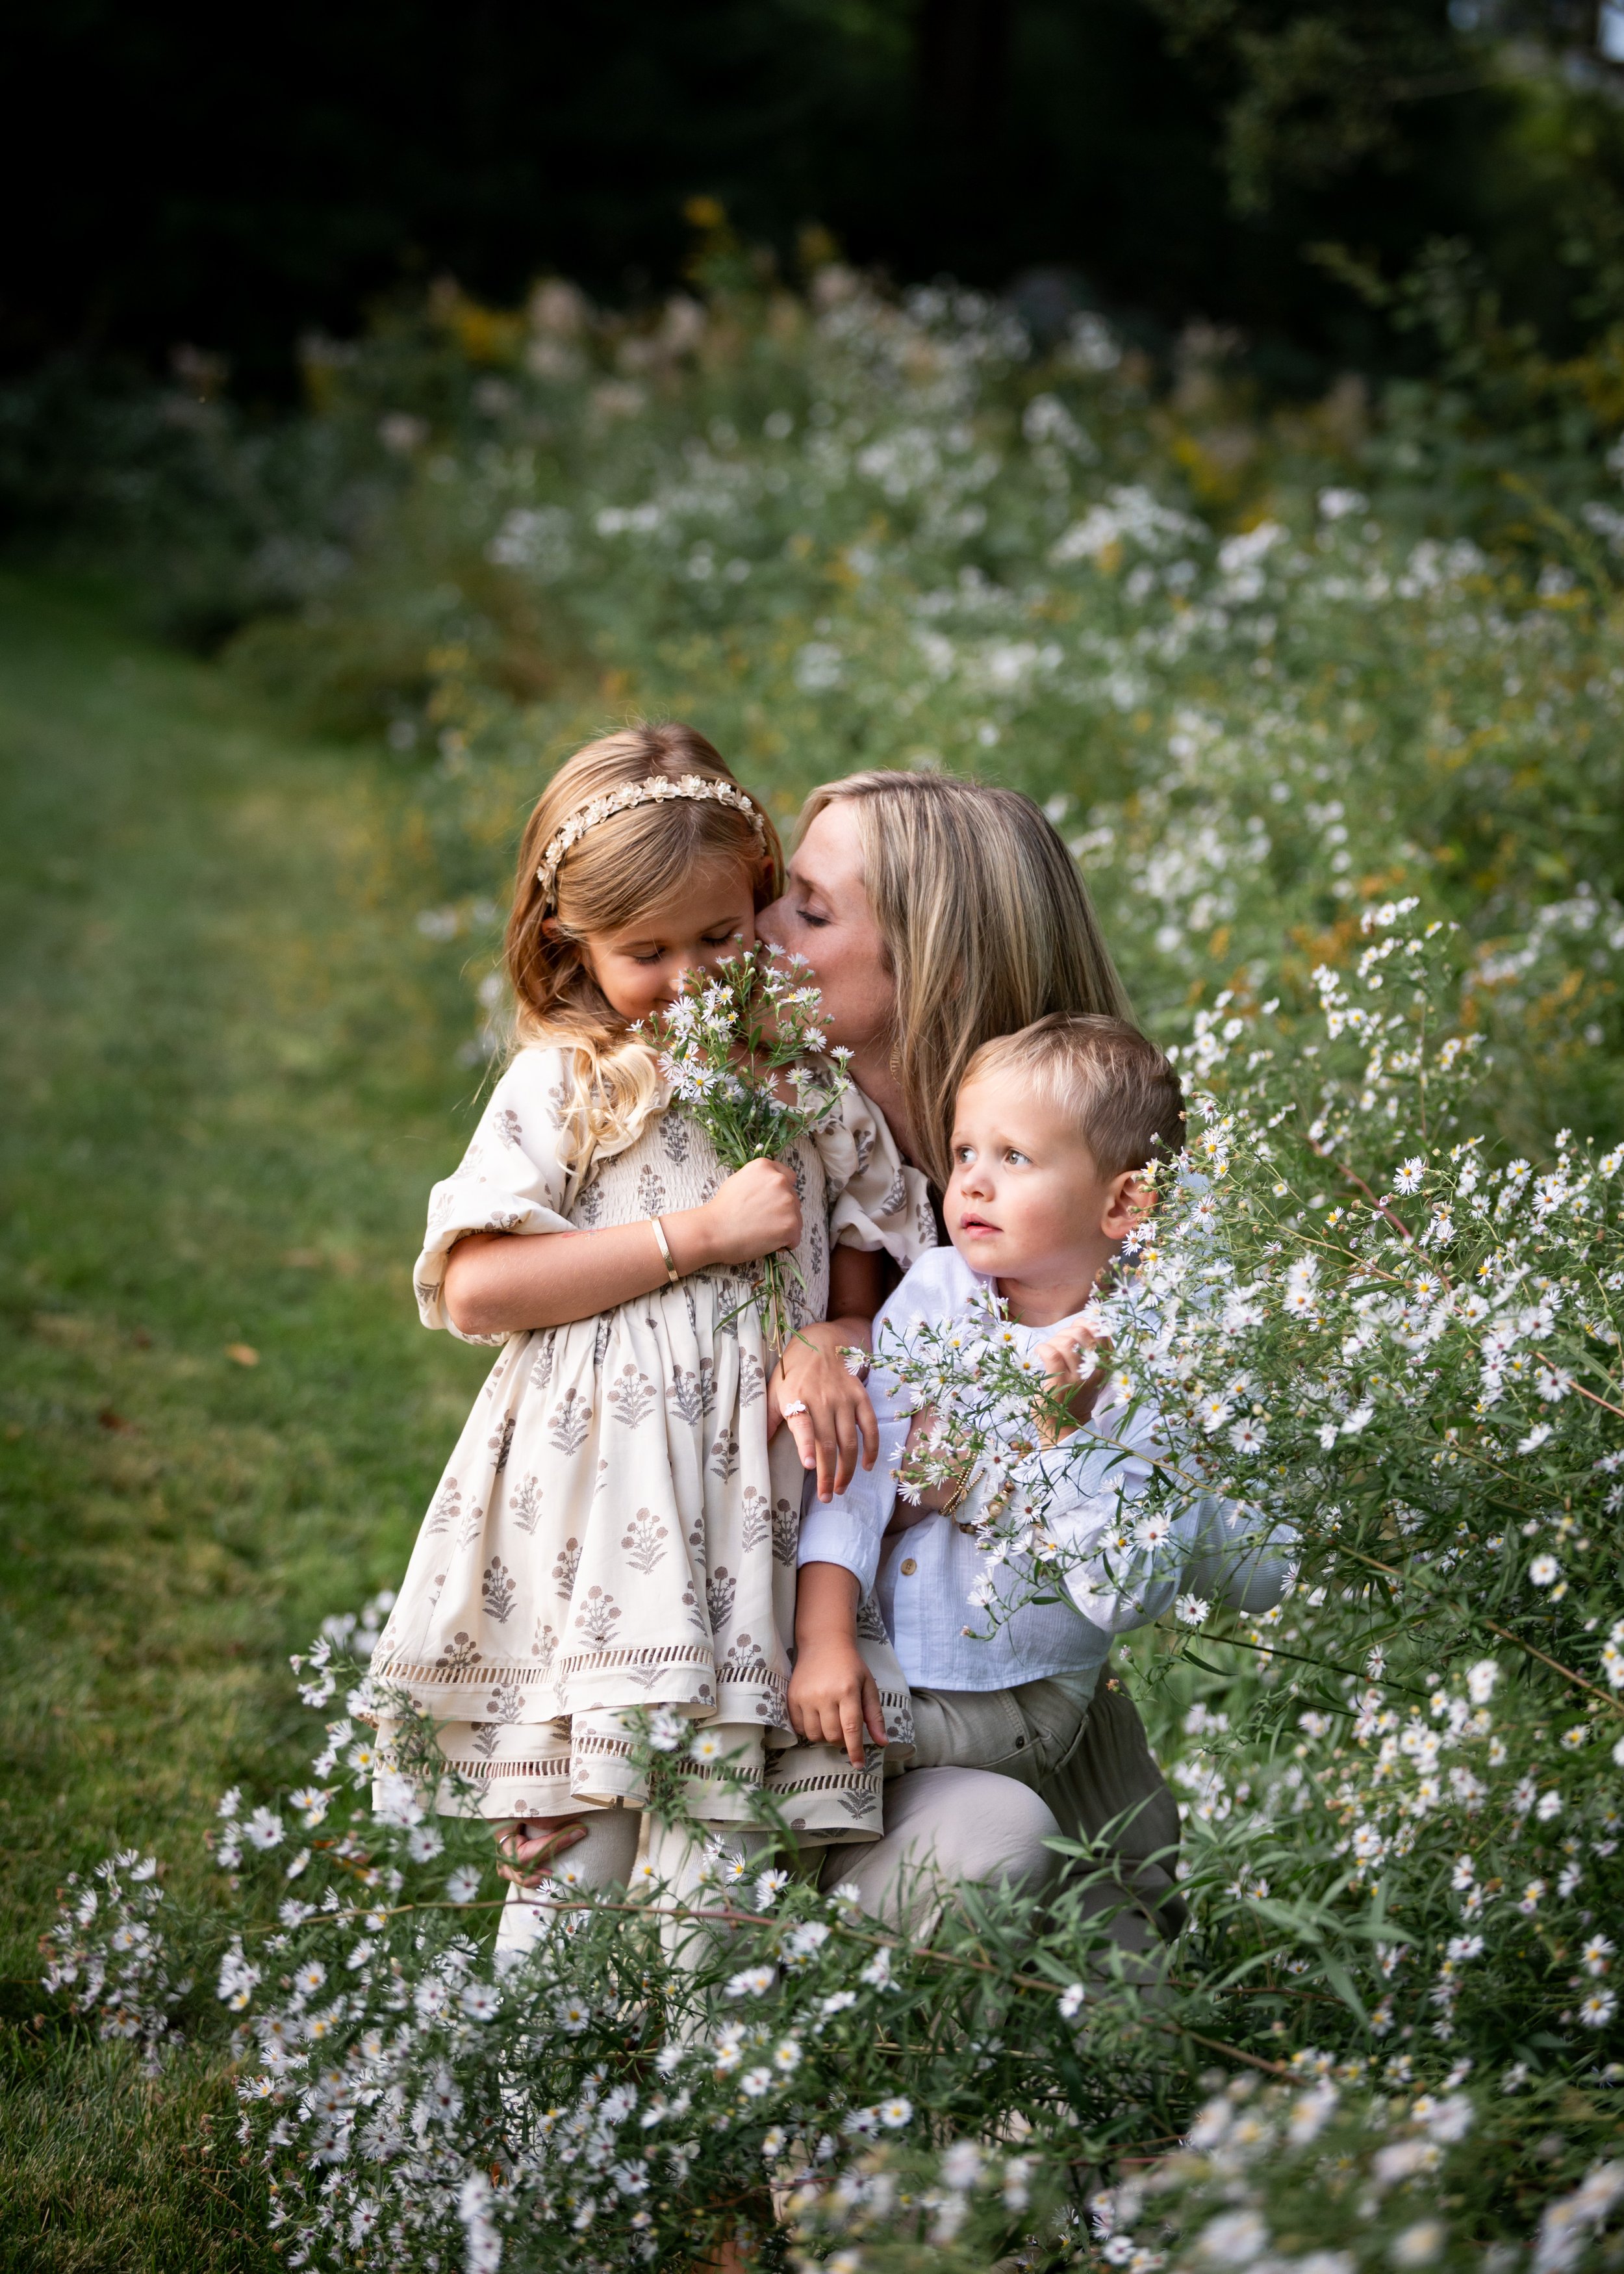 lindsay murphy photography | portland maine family photographer | maine mom in flowers with children.jpg